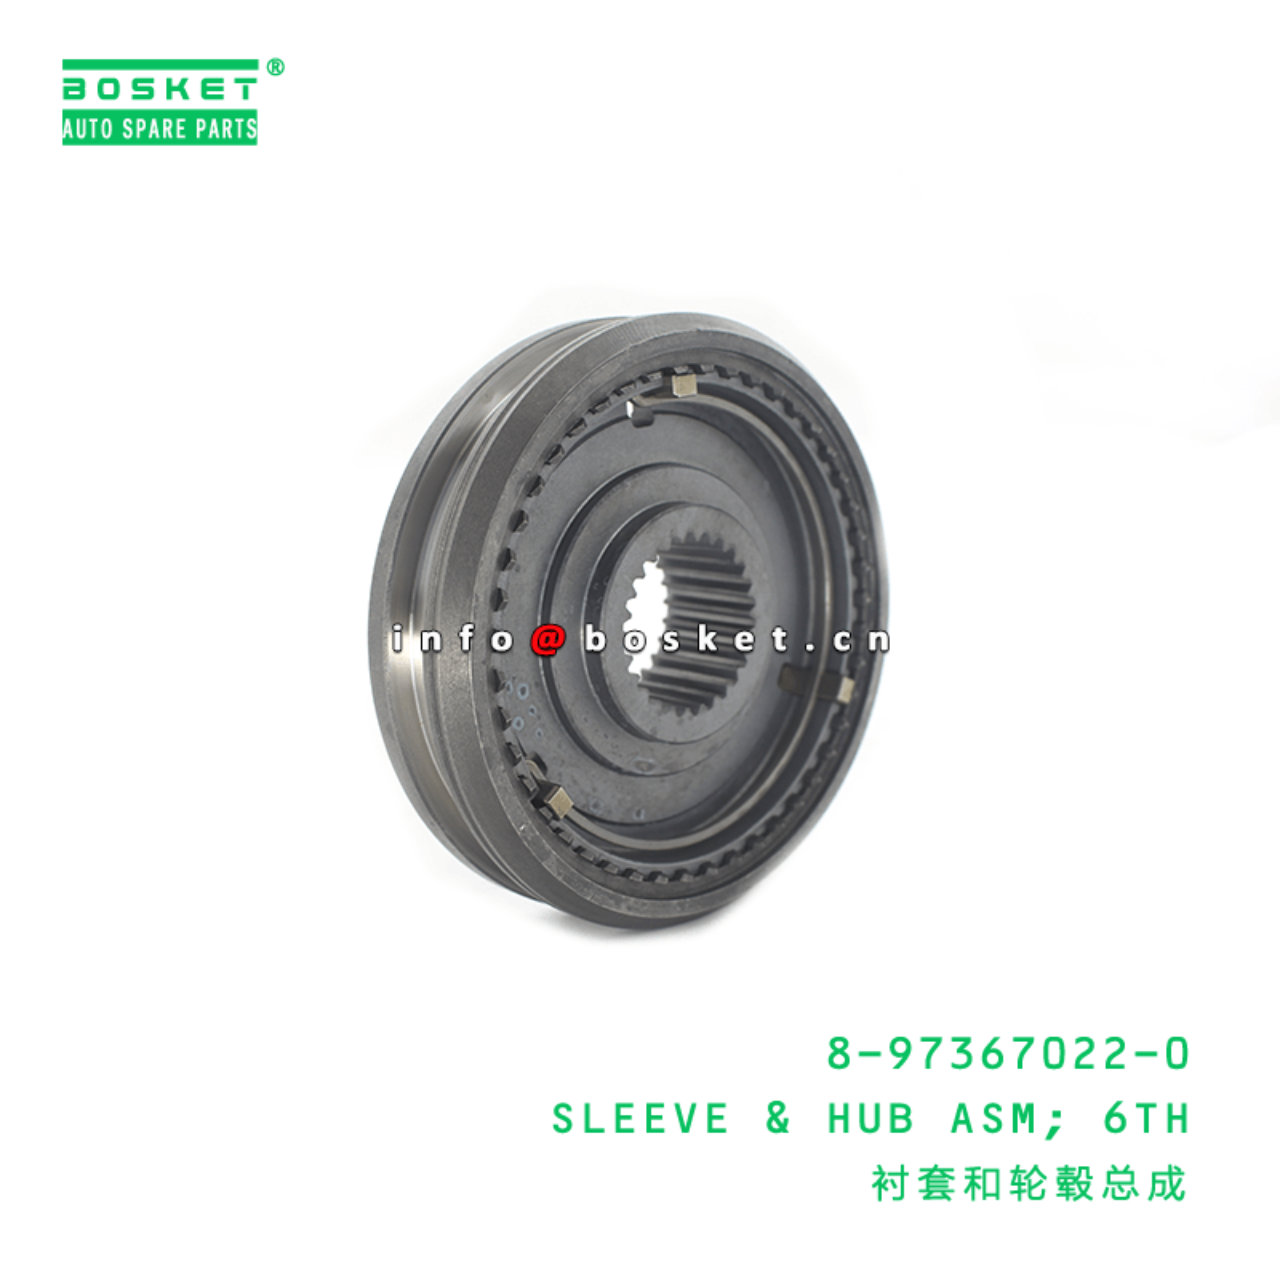 8-97367022-0 Sixth Sleeve & Hub Assembly 8973670220 Suitable for 